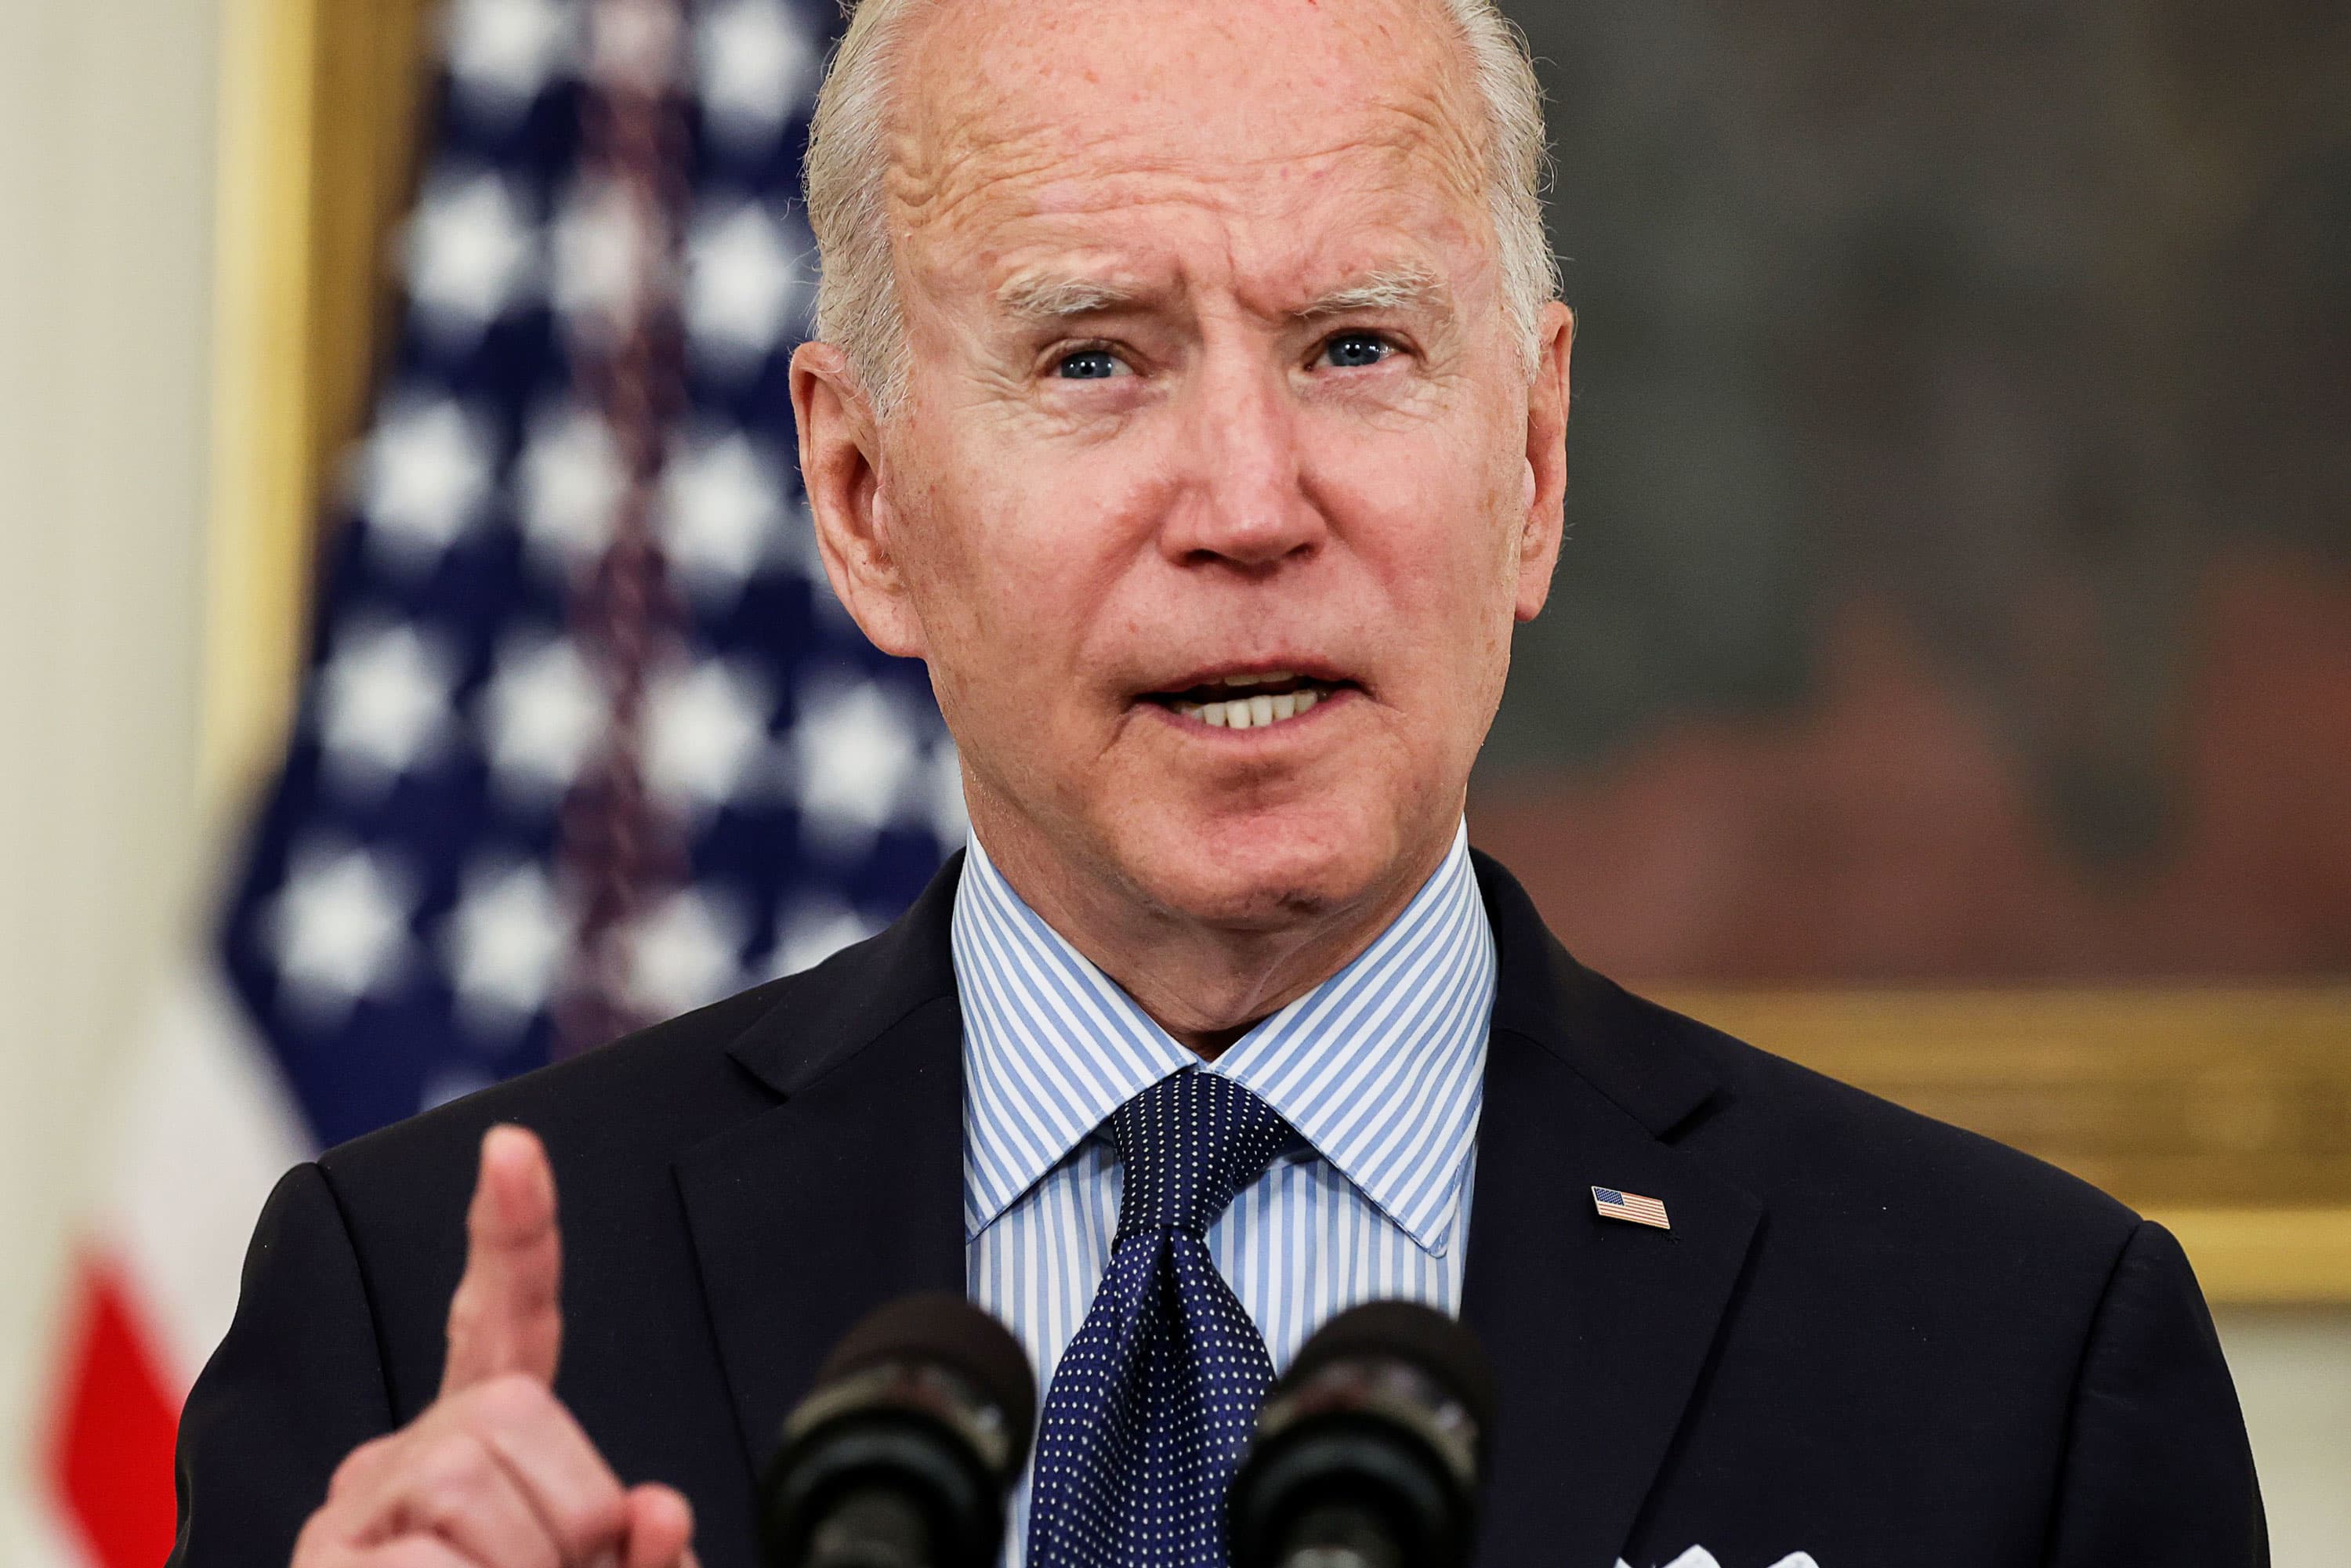 Biden outlines plan to expand U.S. health programs as part of broad domestic spe..